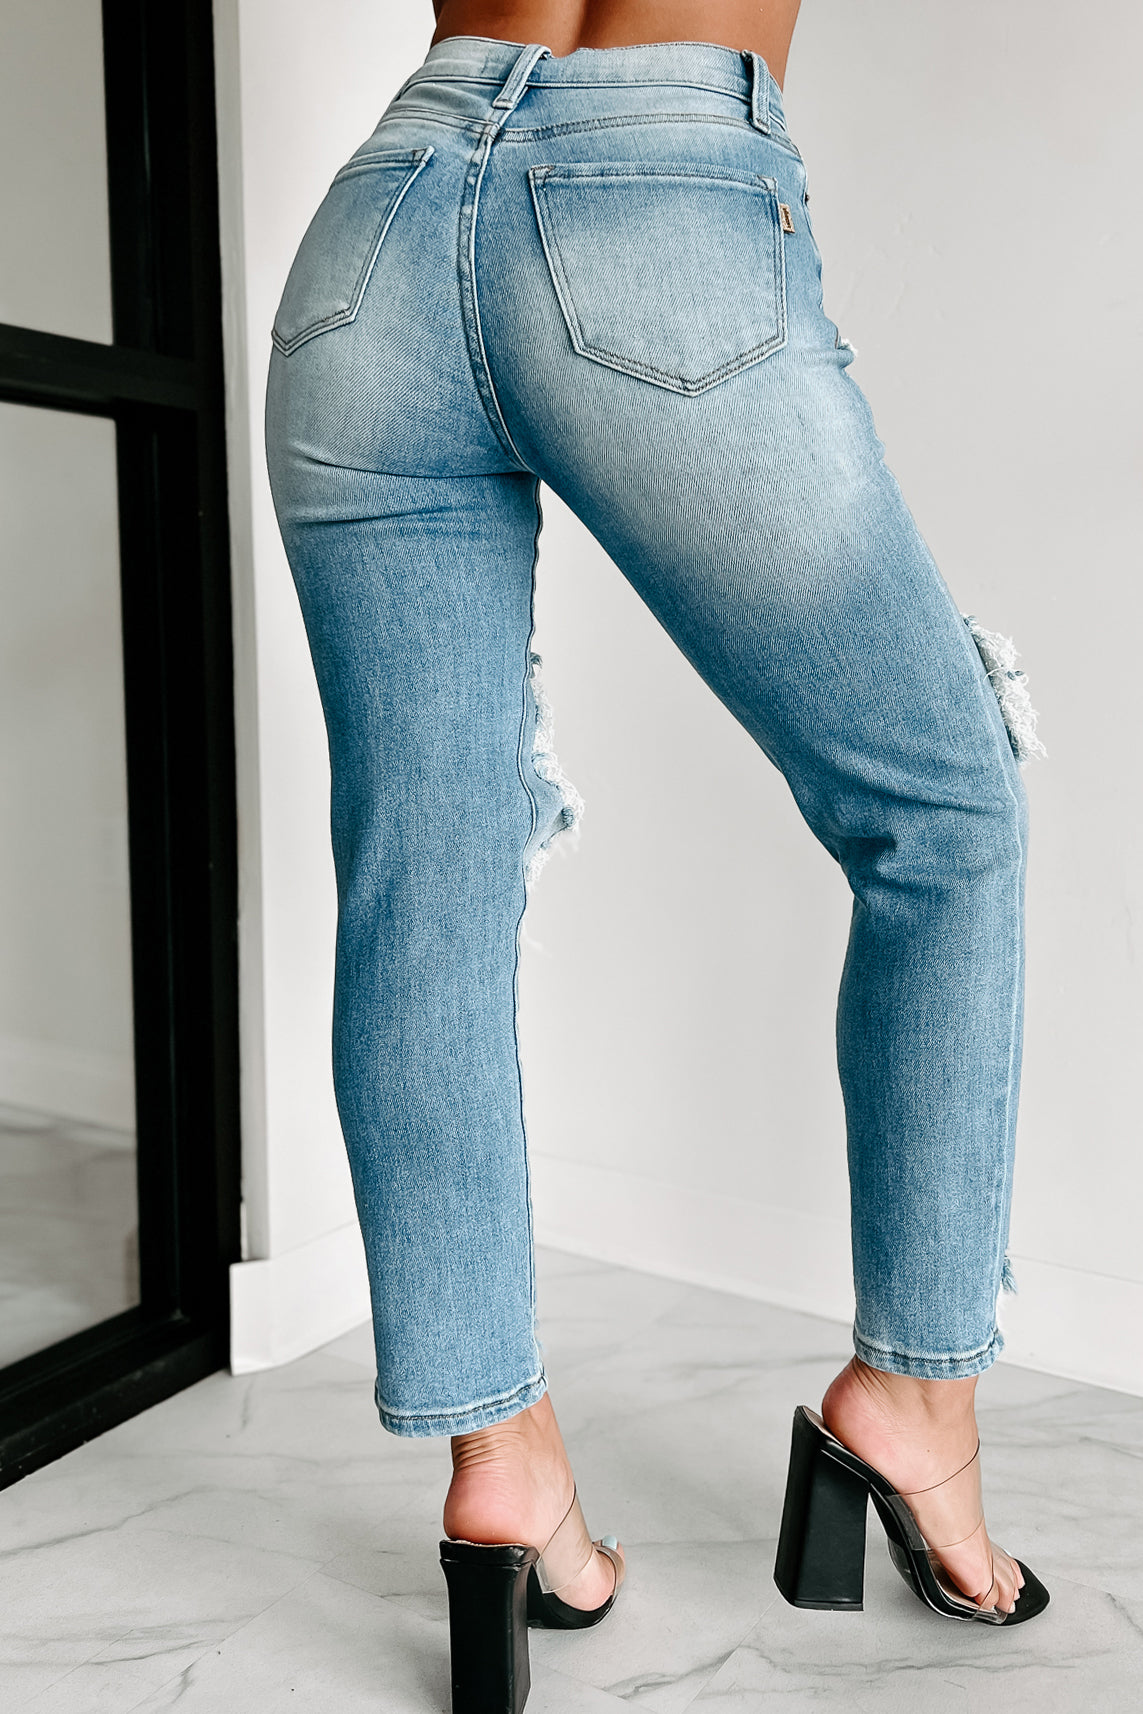 Low-rise jeans? No thanks